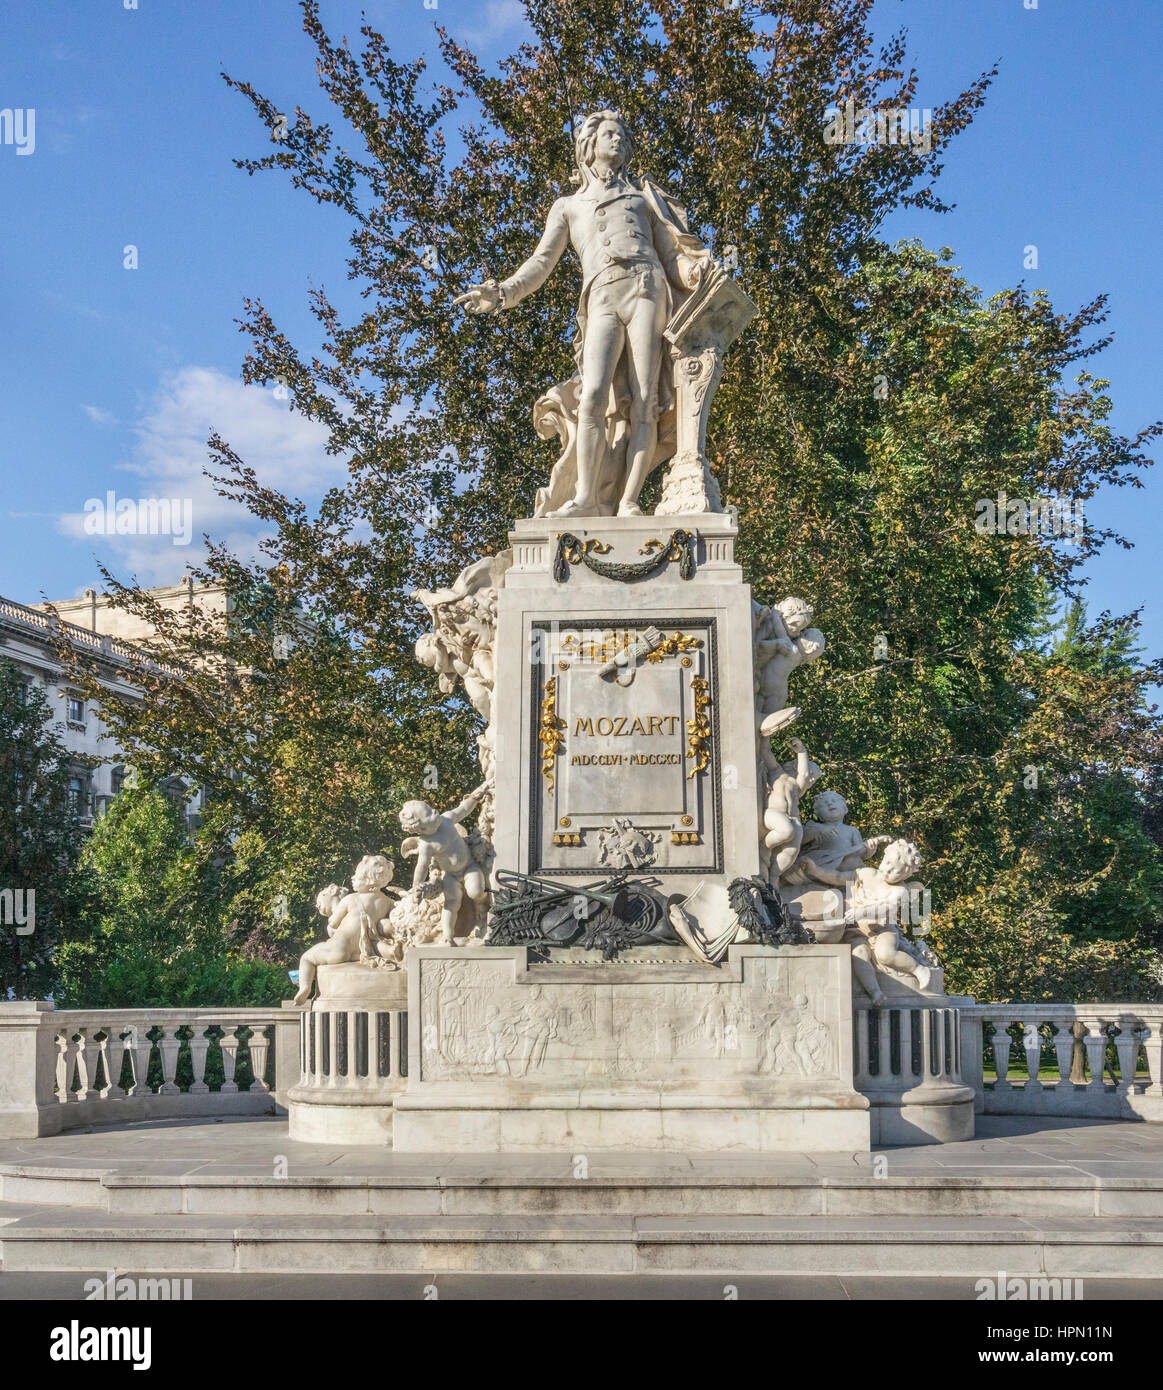 Vienna, Burggarten (Imperial Palace Gardens), view of the Mozart monument Stock Photo